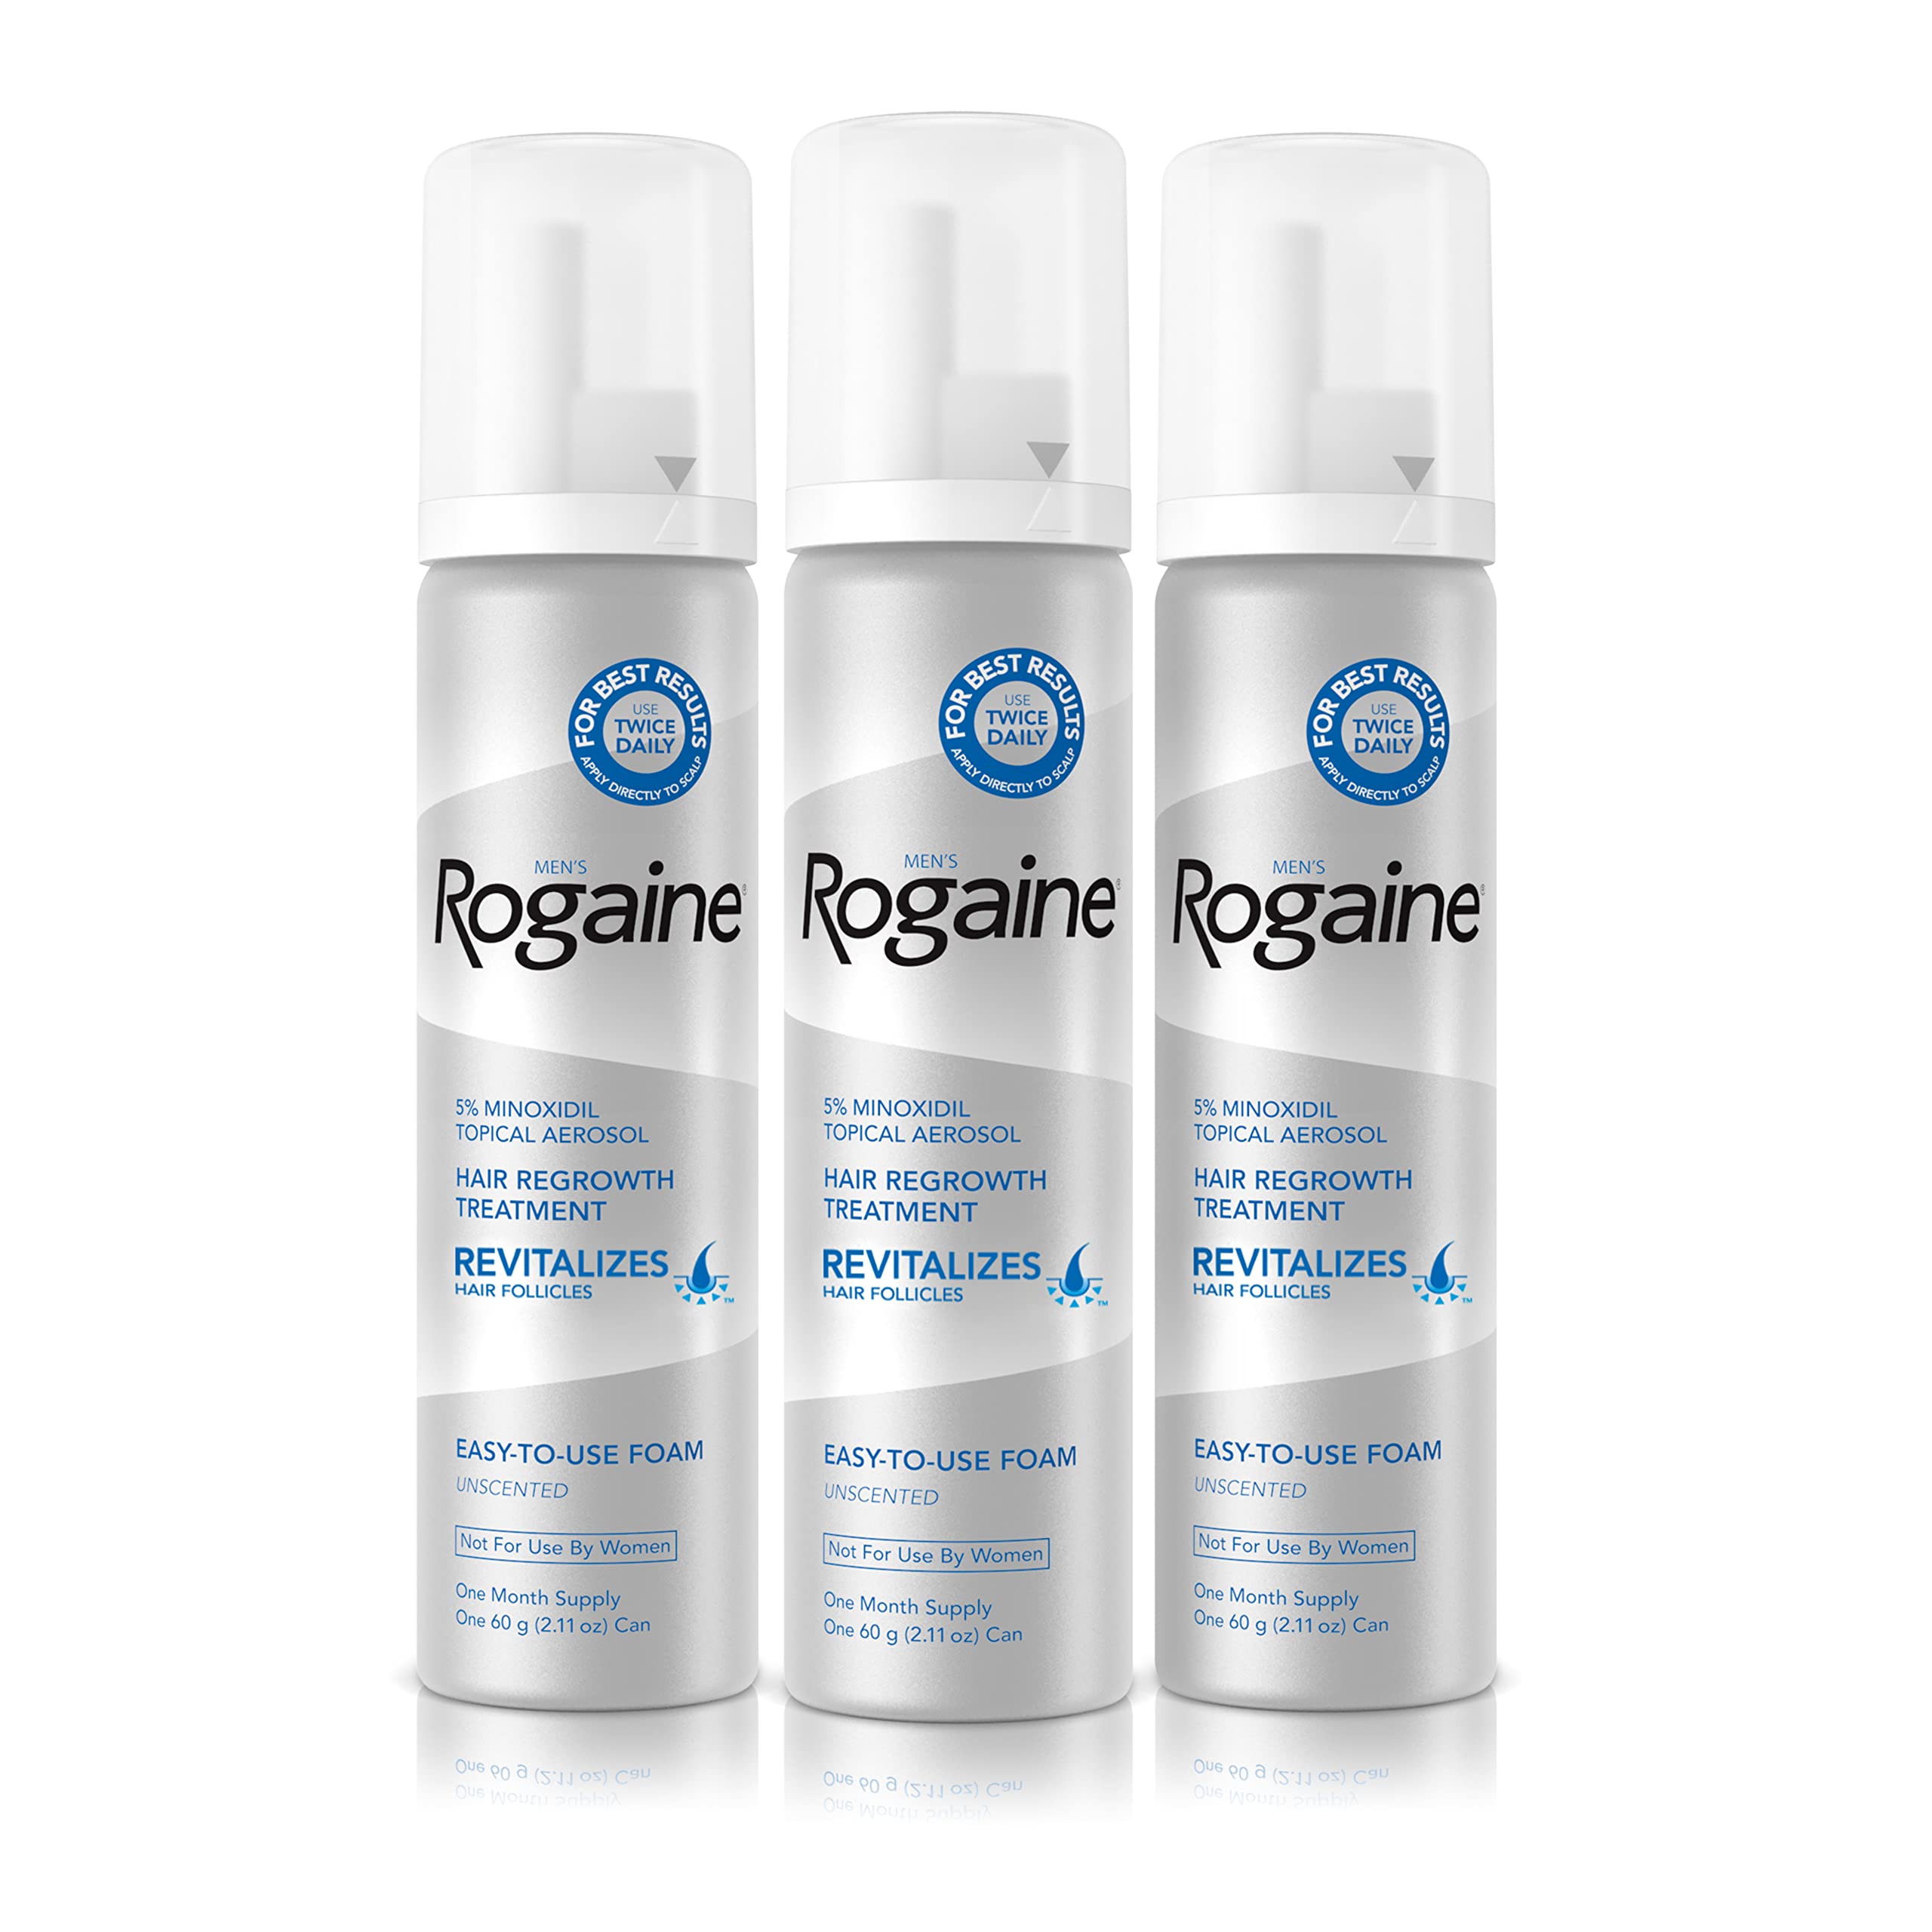 Men's Rogaine 5% Minoxidil Foam for Hair Loss and Hair Regrowth, Topical Treatment for Thinning Hair, 3-Month Supply, 2.11 Ounce (Pack of 3)